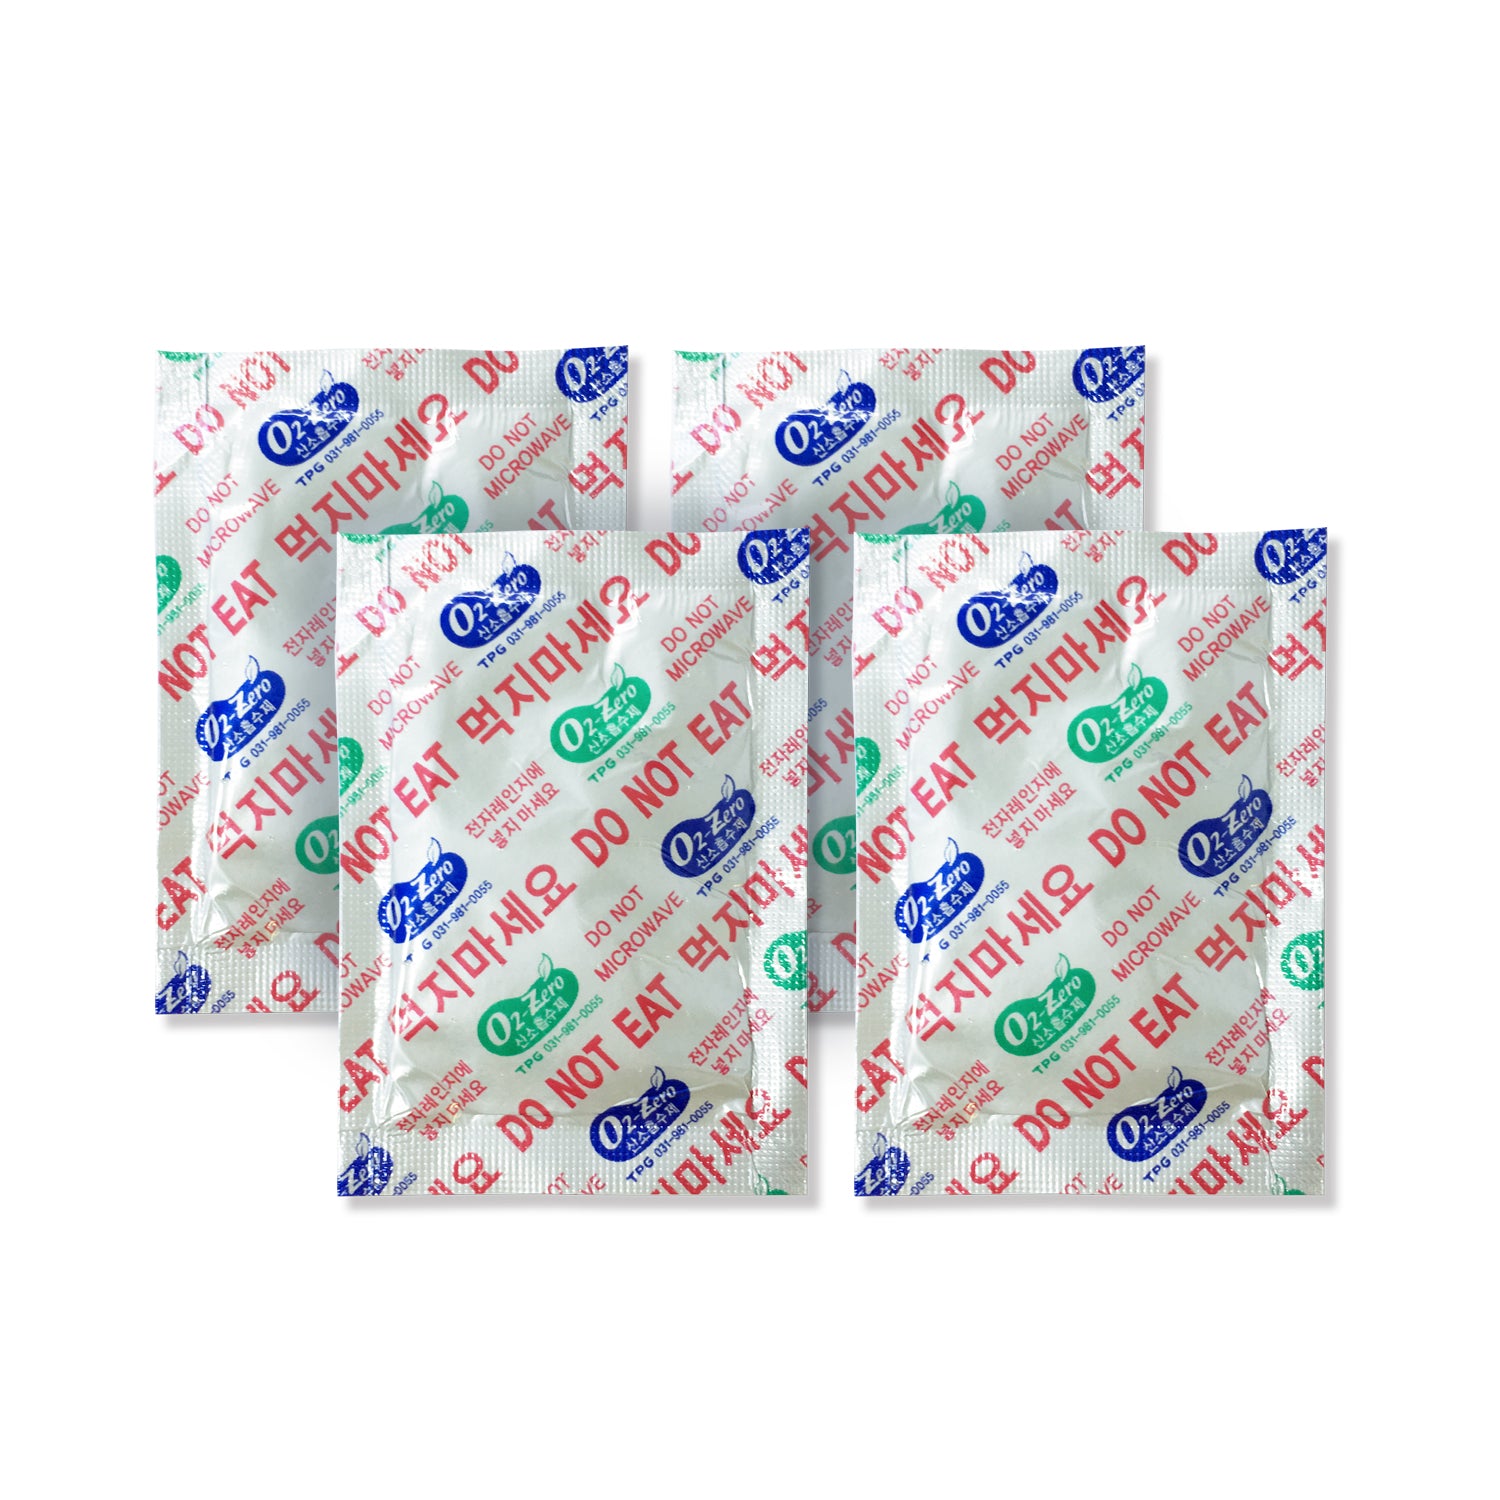 Fresh & Fresh (1890 Packs) 500 CC Premium Oxygen Absorbers(18 Bag of 105 Packets) - ISO 9001 & 14001 Certified Facility Manufactured